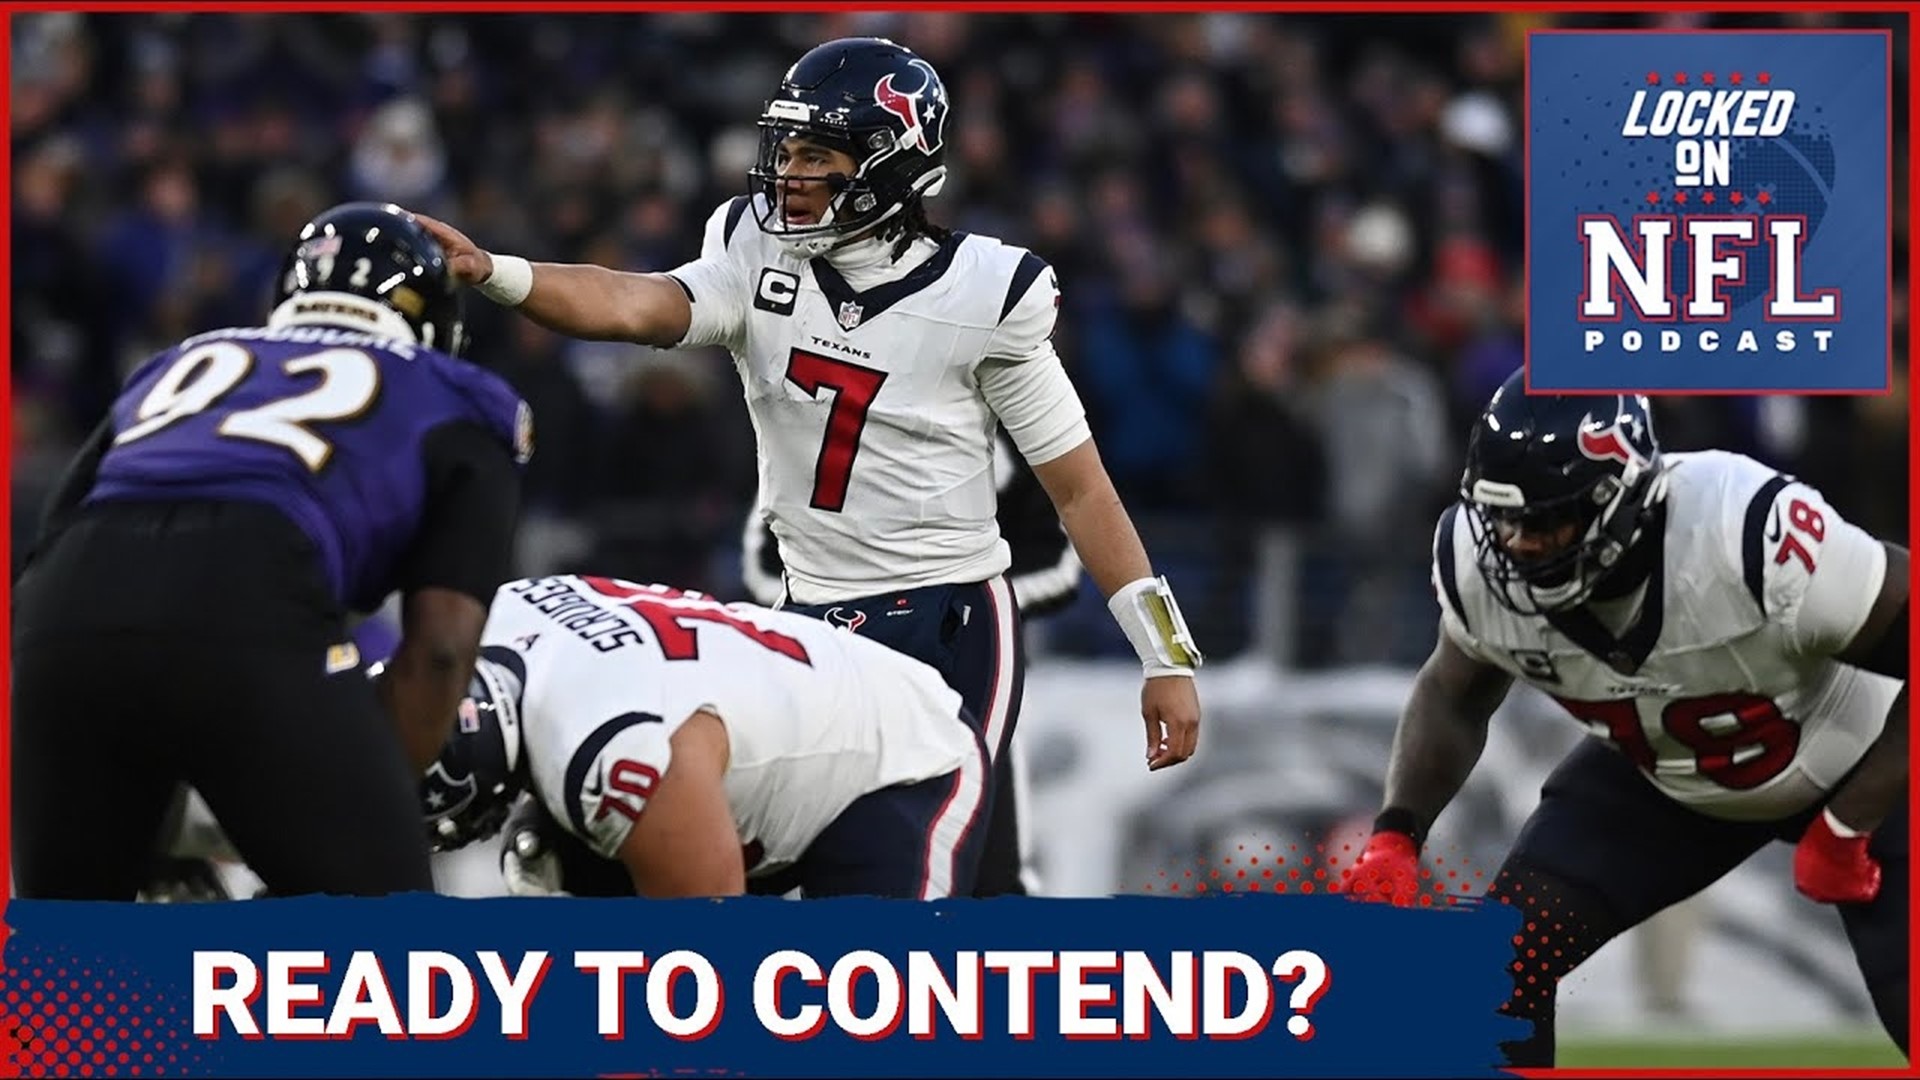 After trading for Stefon Diggs and Joe Mixon, among other moves, are the Houston Texans ready to contend in the AFC playoff race?